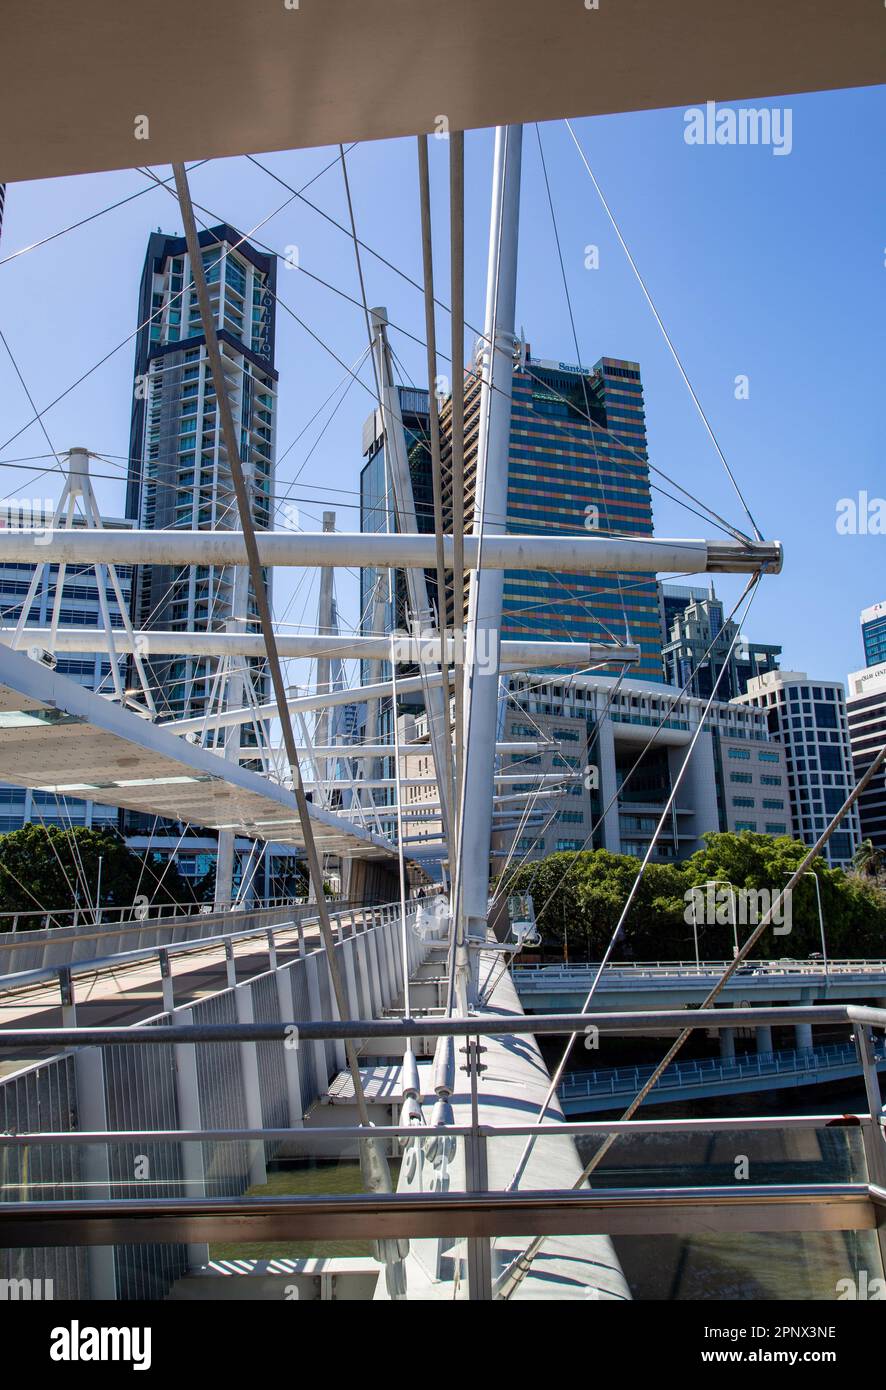 The Kurilpa Bridge is a 470 metres pedestrian and bicycle bridge over the Brisbane River opened in October 2009. It is the worlds largest hybrid tense Stock Photo